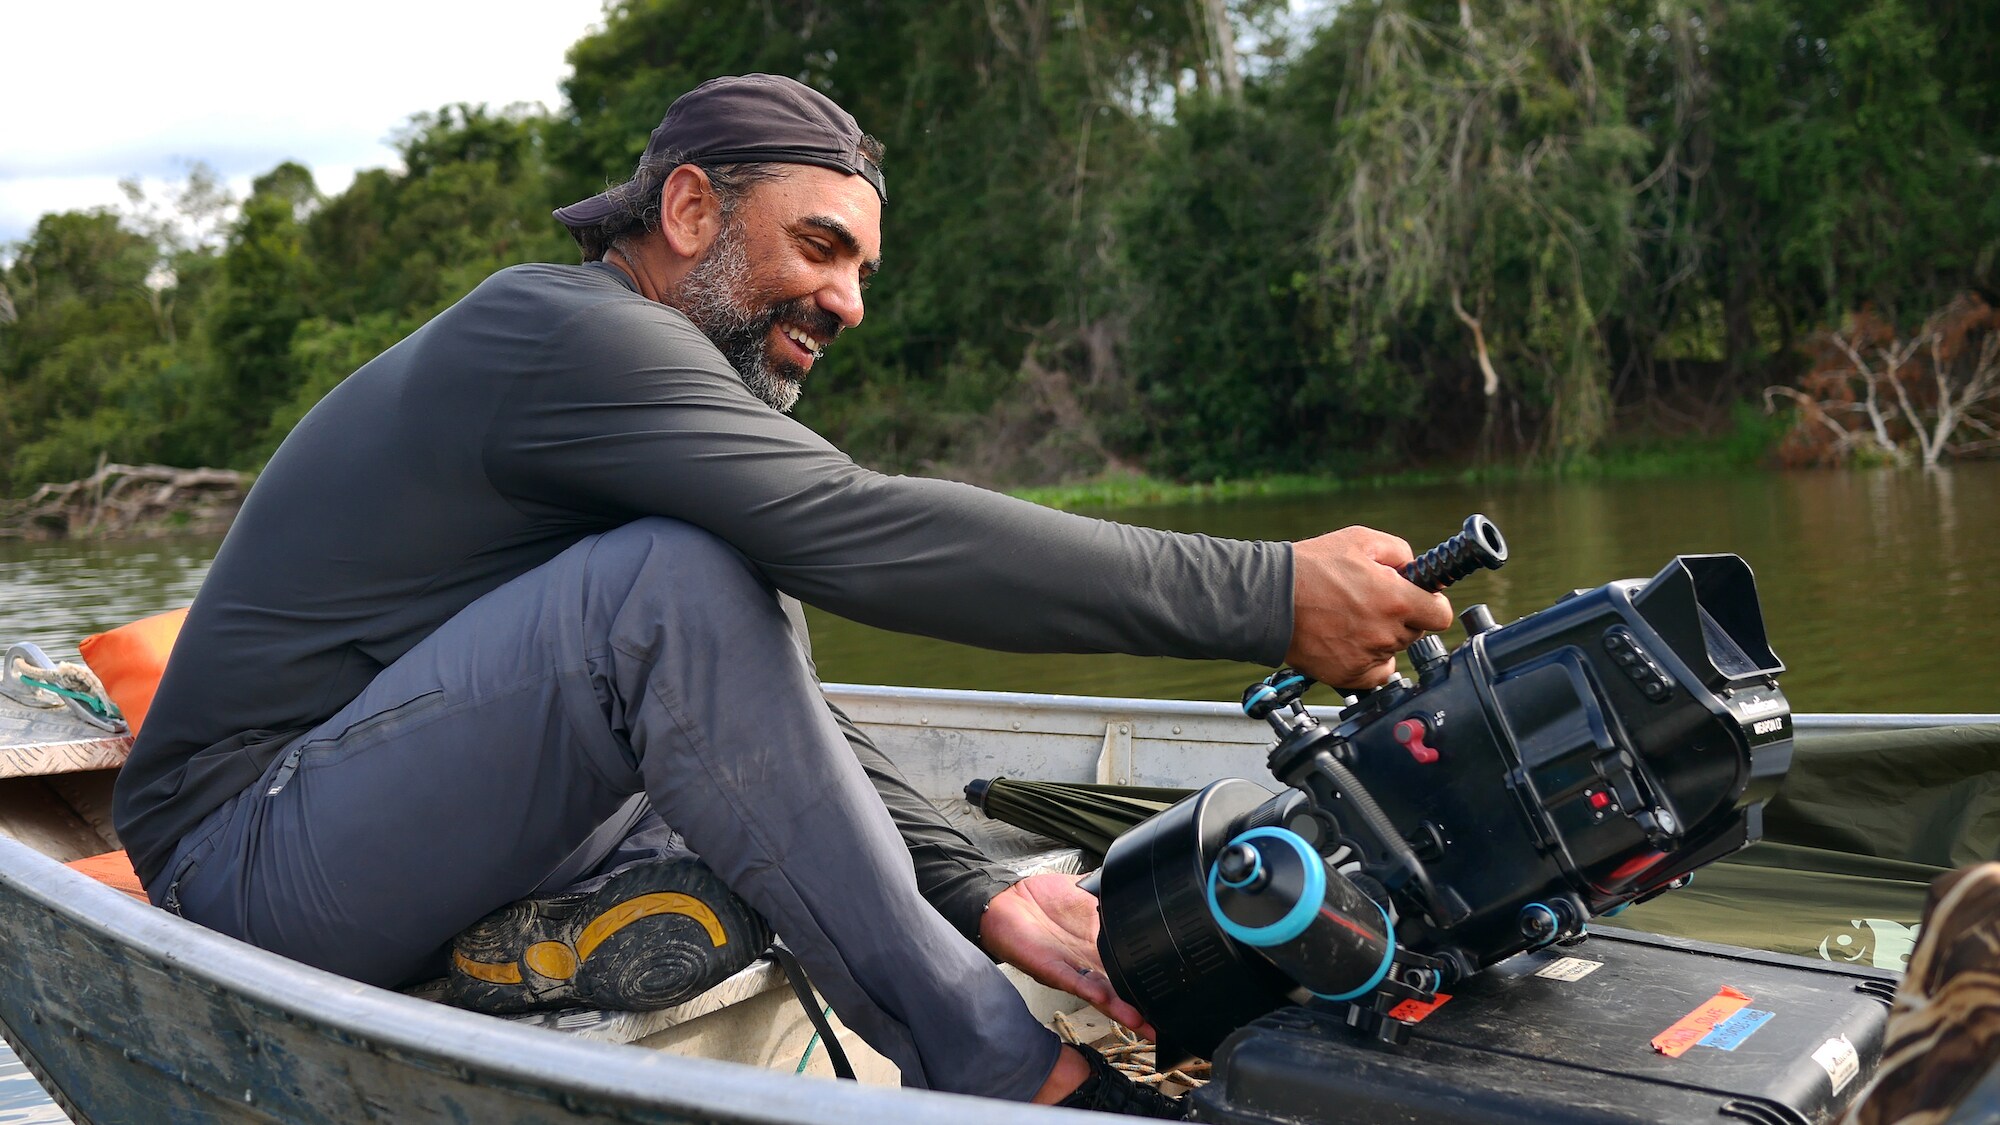 Cristian Dimitrius with a camera in underwater housing. (National Geographic for Disney+/Lillian Todd-Jones)